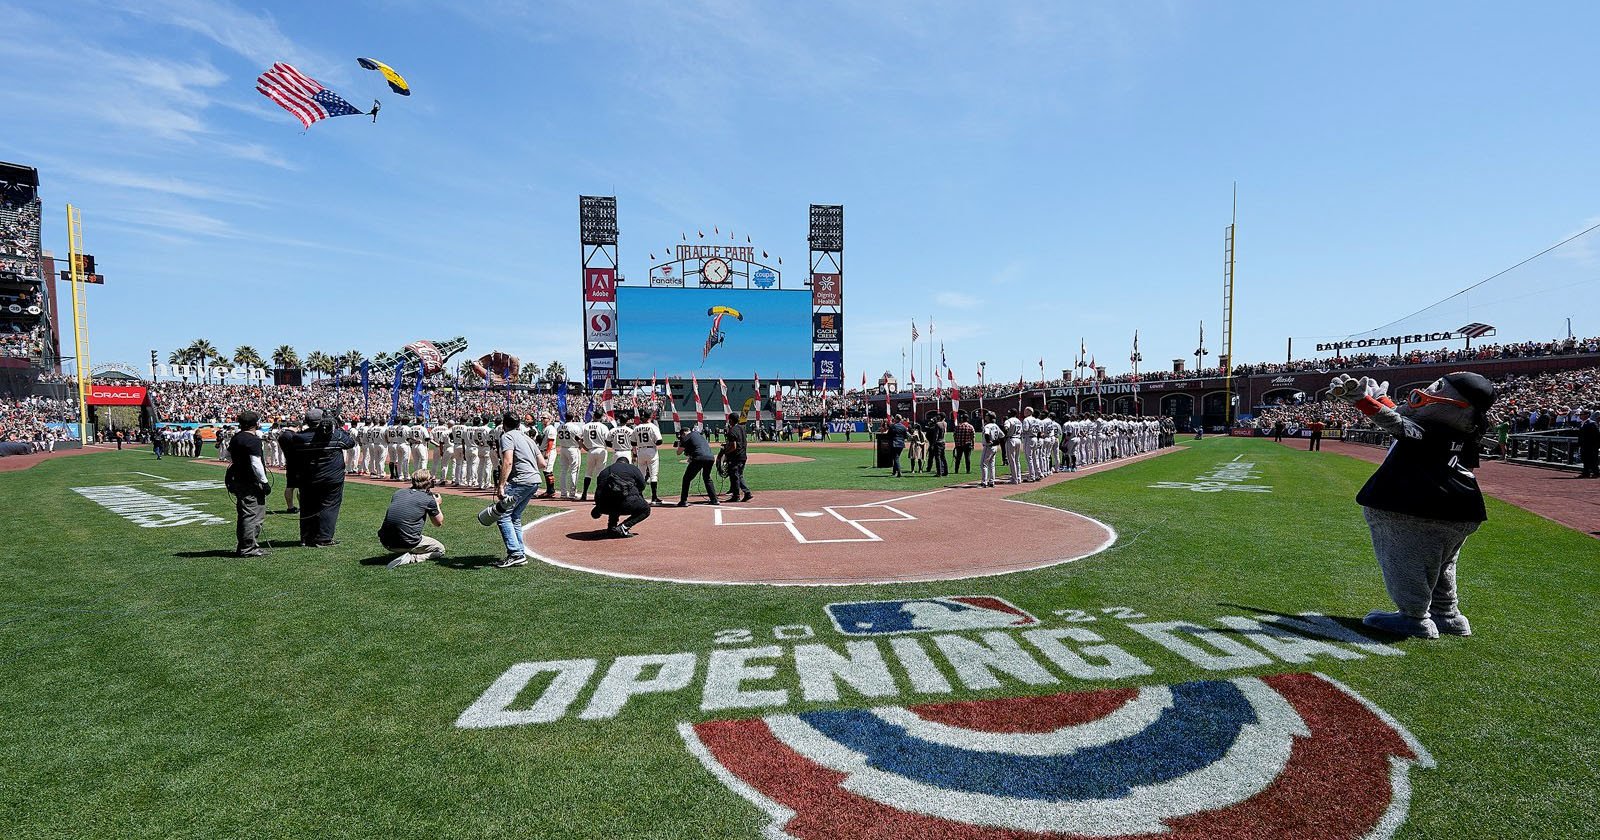 One-Minute Guide: The San Diego Padres Opening Day - San Diego Magazine